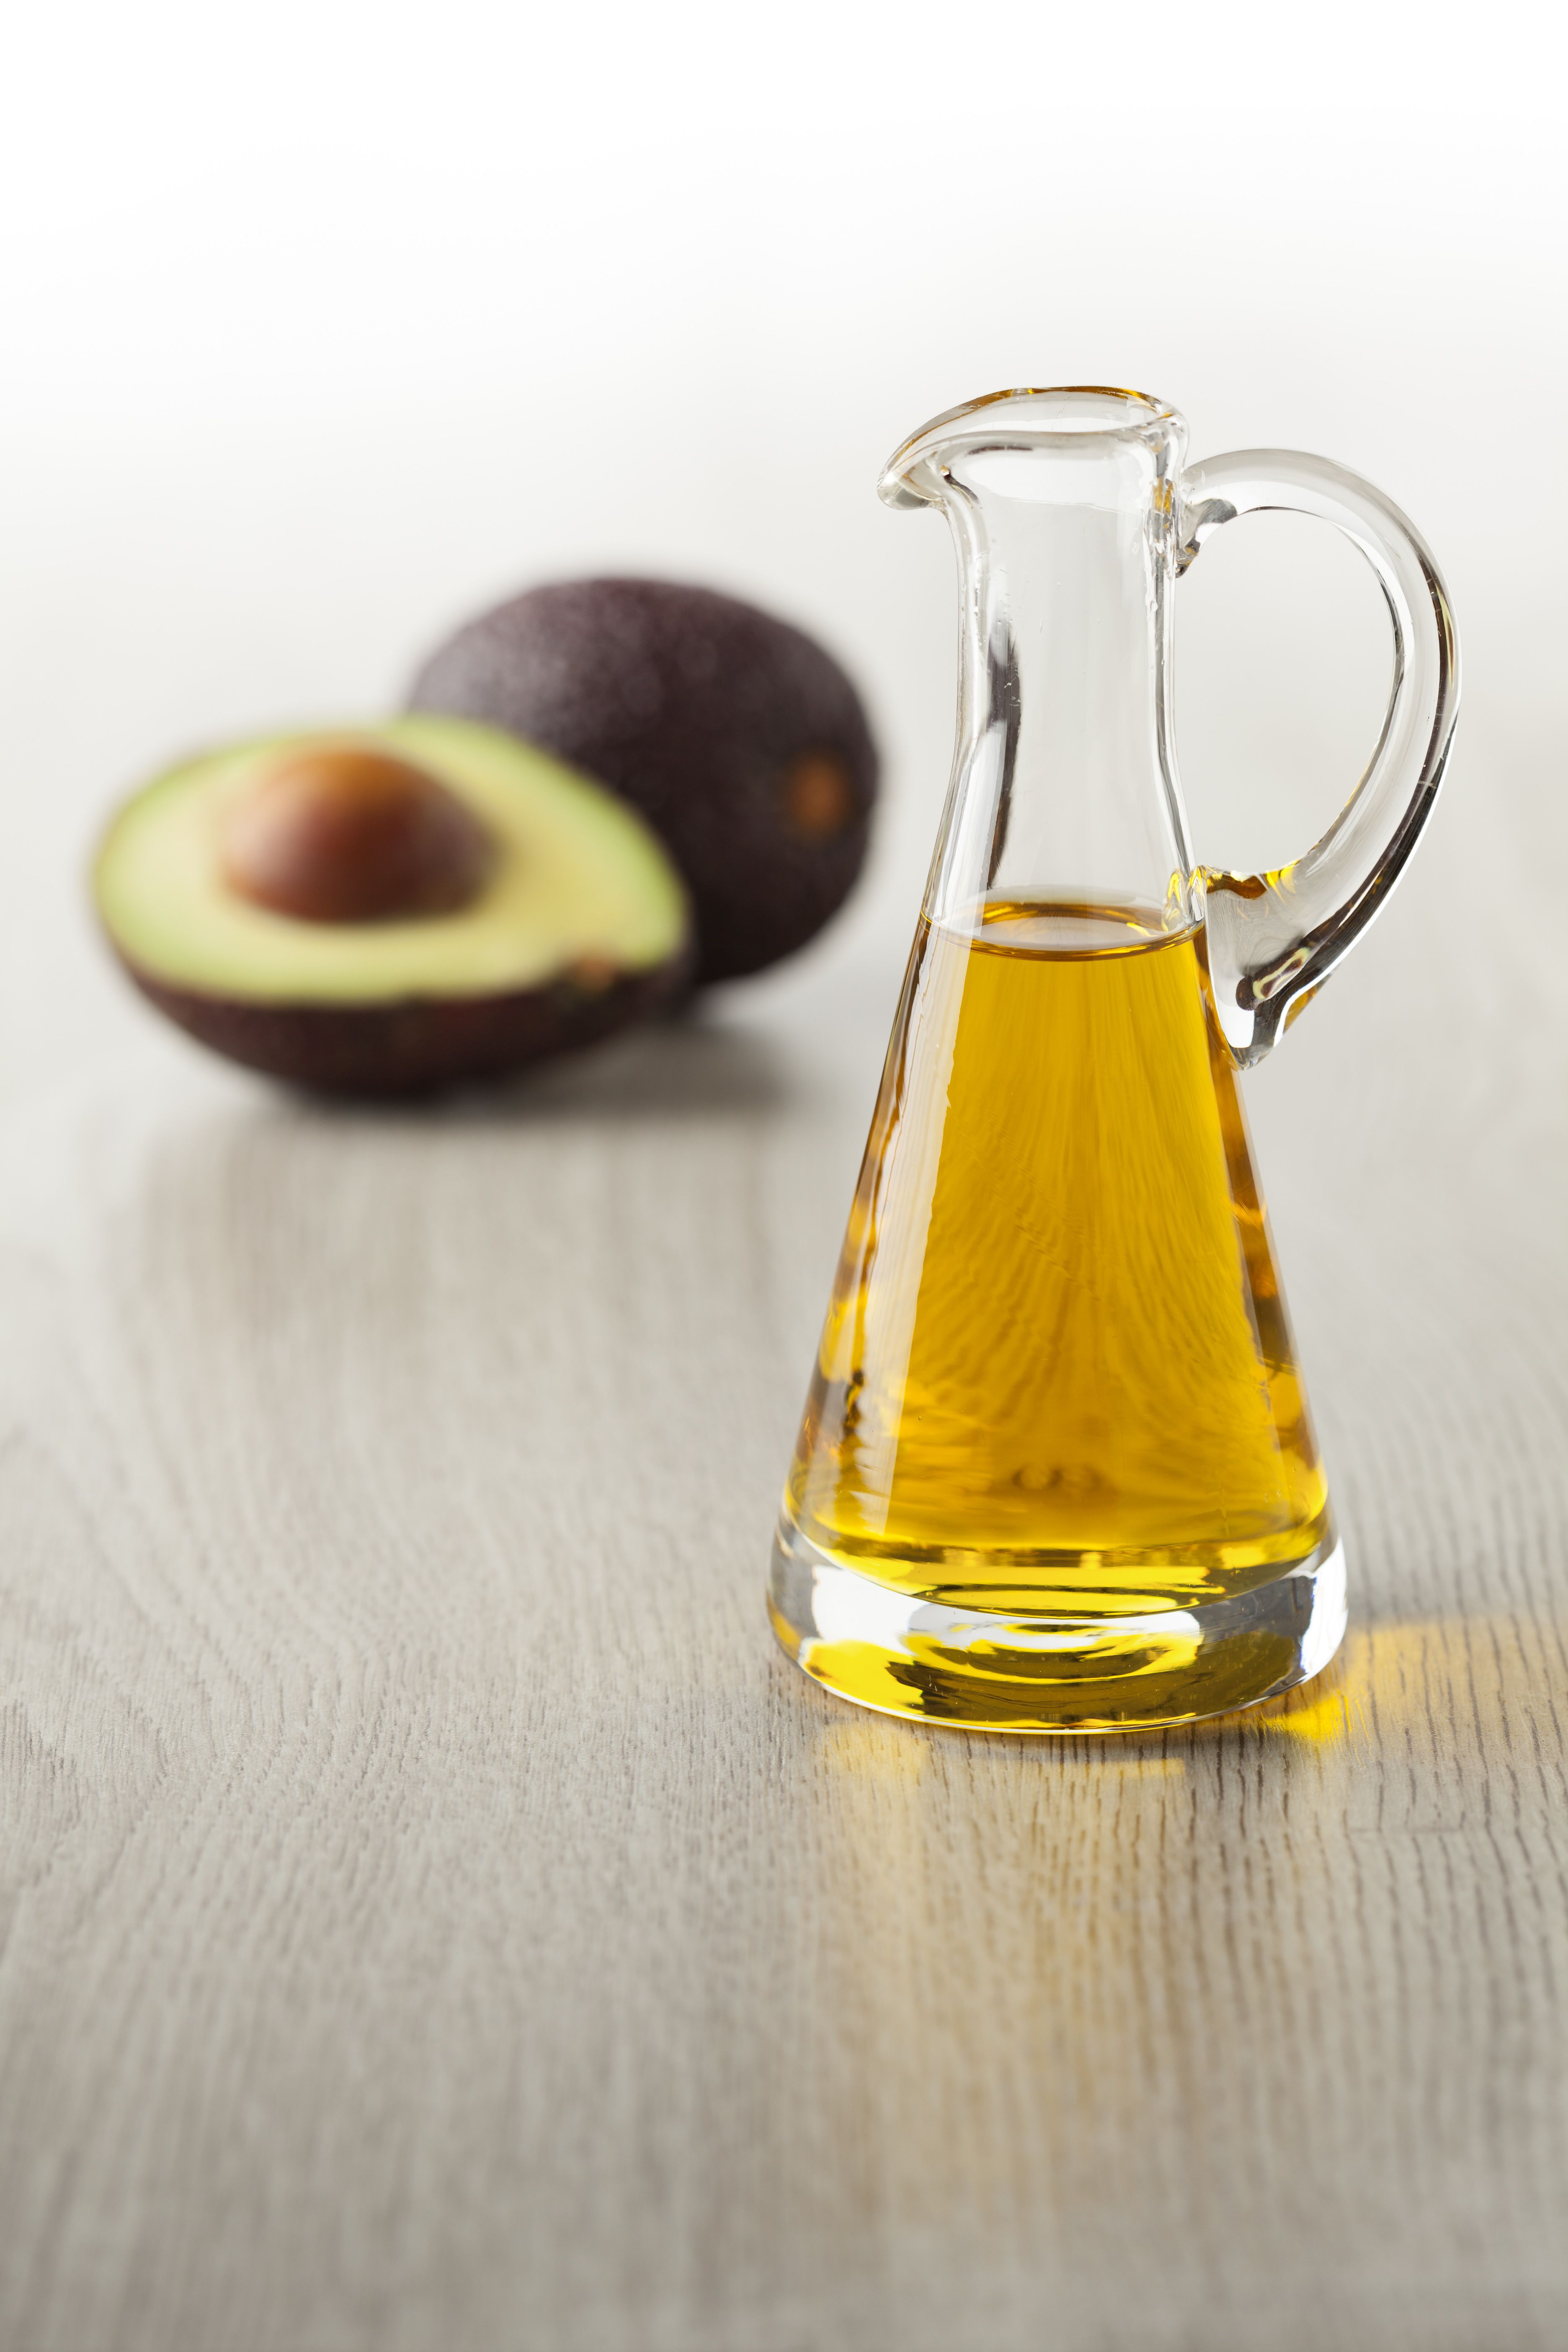 82% Of Avocado Oil Is Rancid or Fake. Is Yours? - Ancestral Nutrition